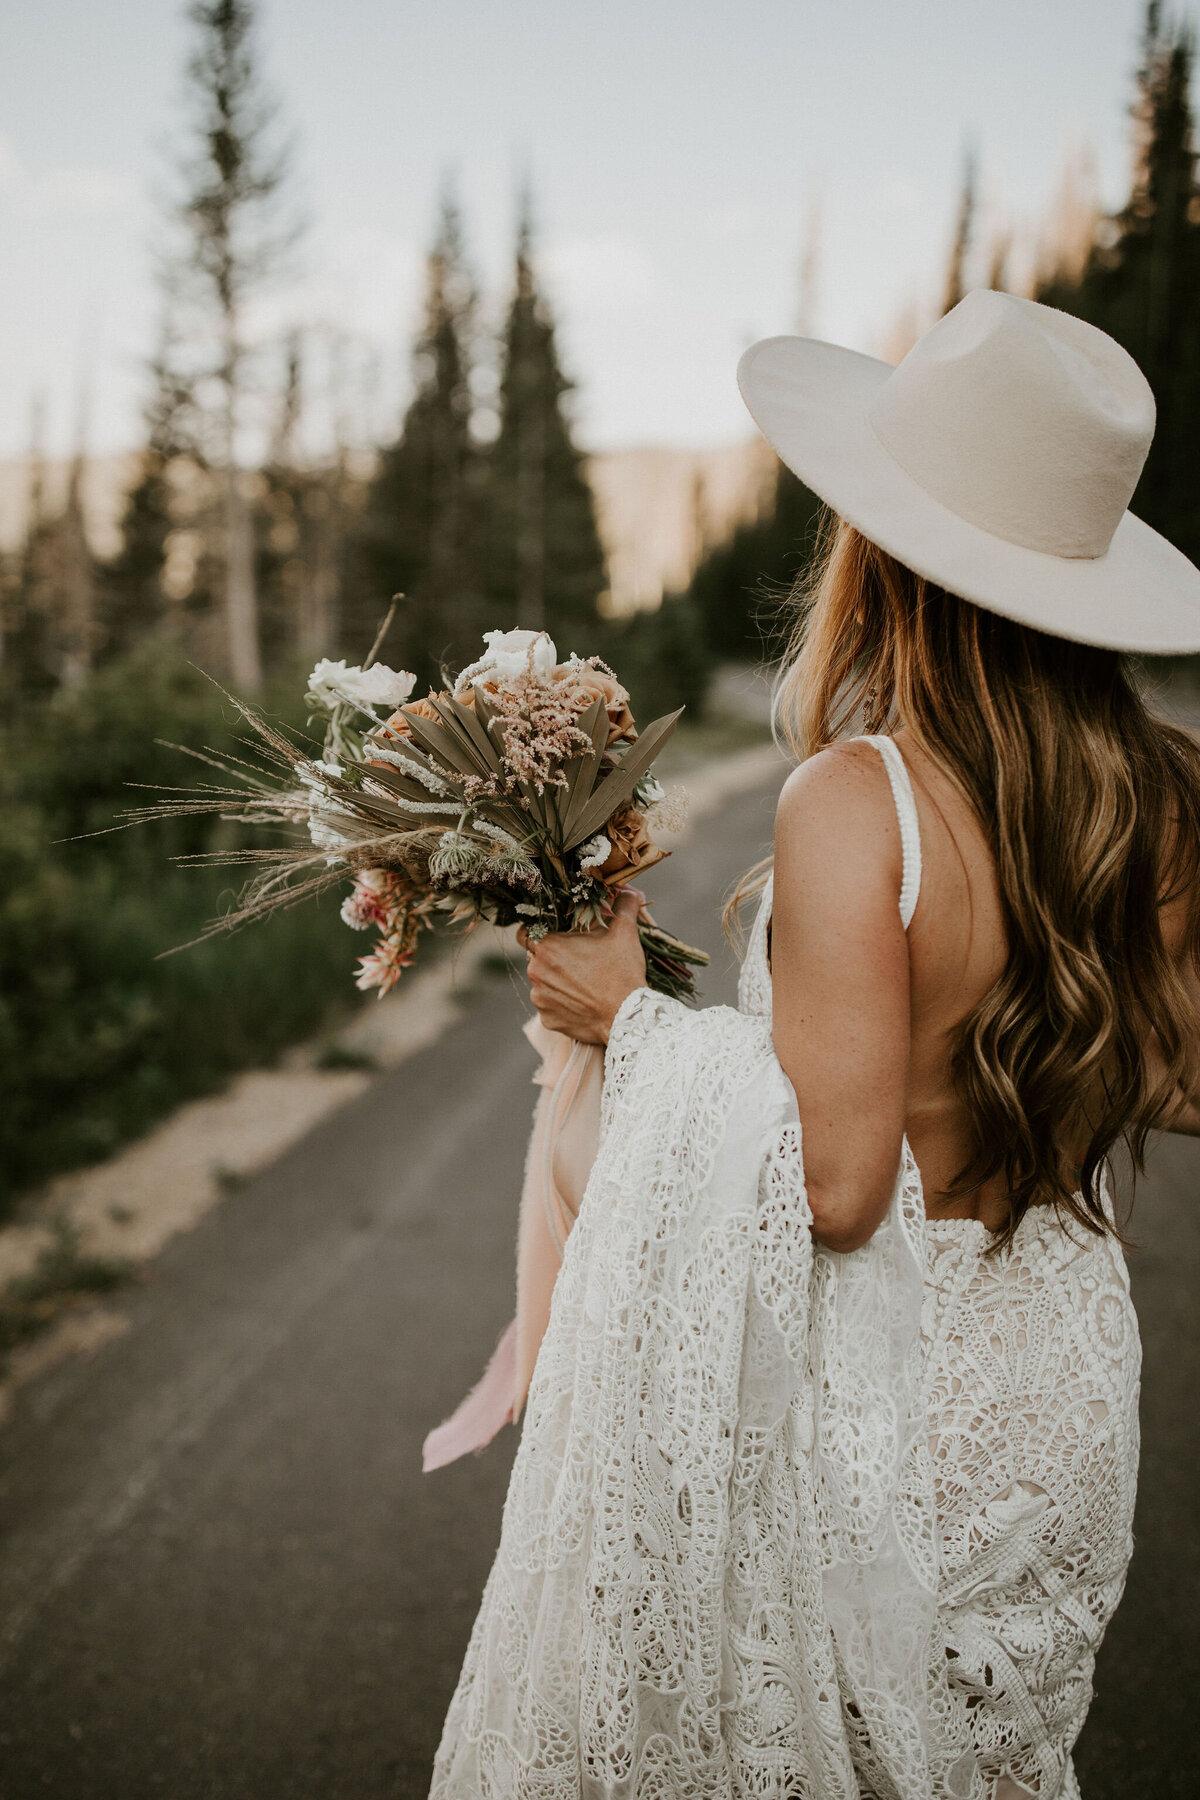 A bride wearing a white wedding gown and ivory hat holding a bouquet of blush and white flowers overlooking  mountains.